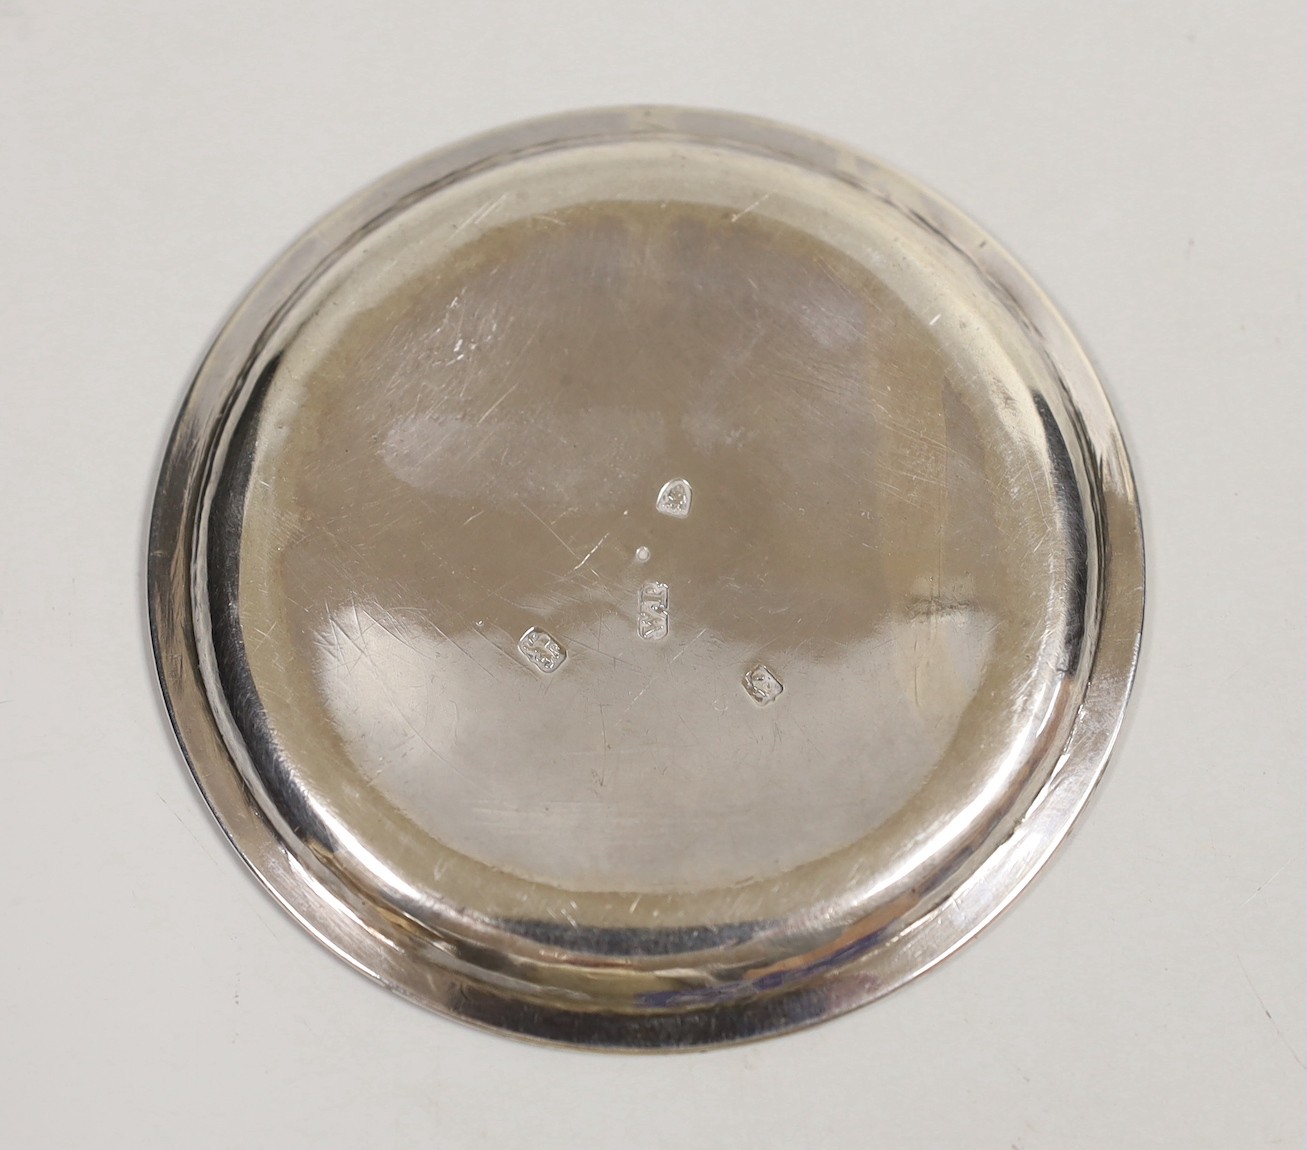 A George III silver glass coaster, William Plummer, London, 1781, 91mm, together with a pair of early 19th century Irish silver condiment spoons and a white metal cartouche.